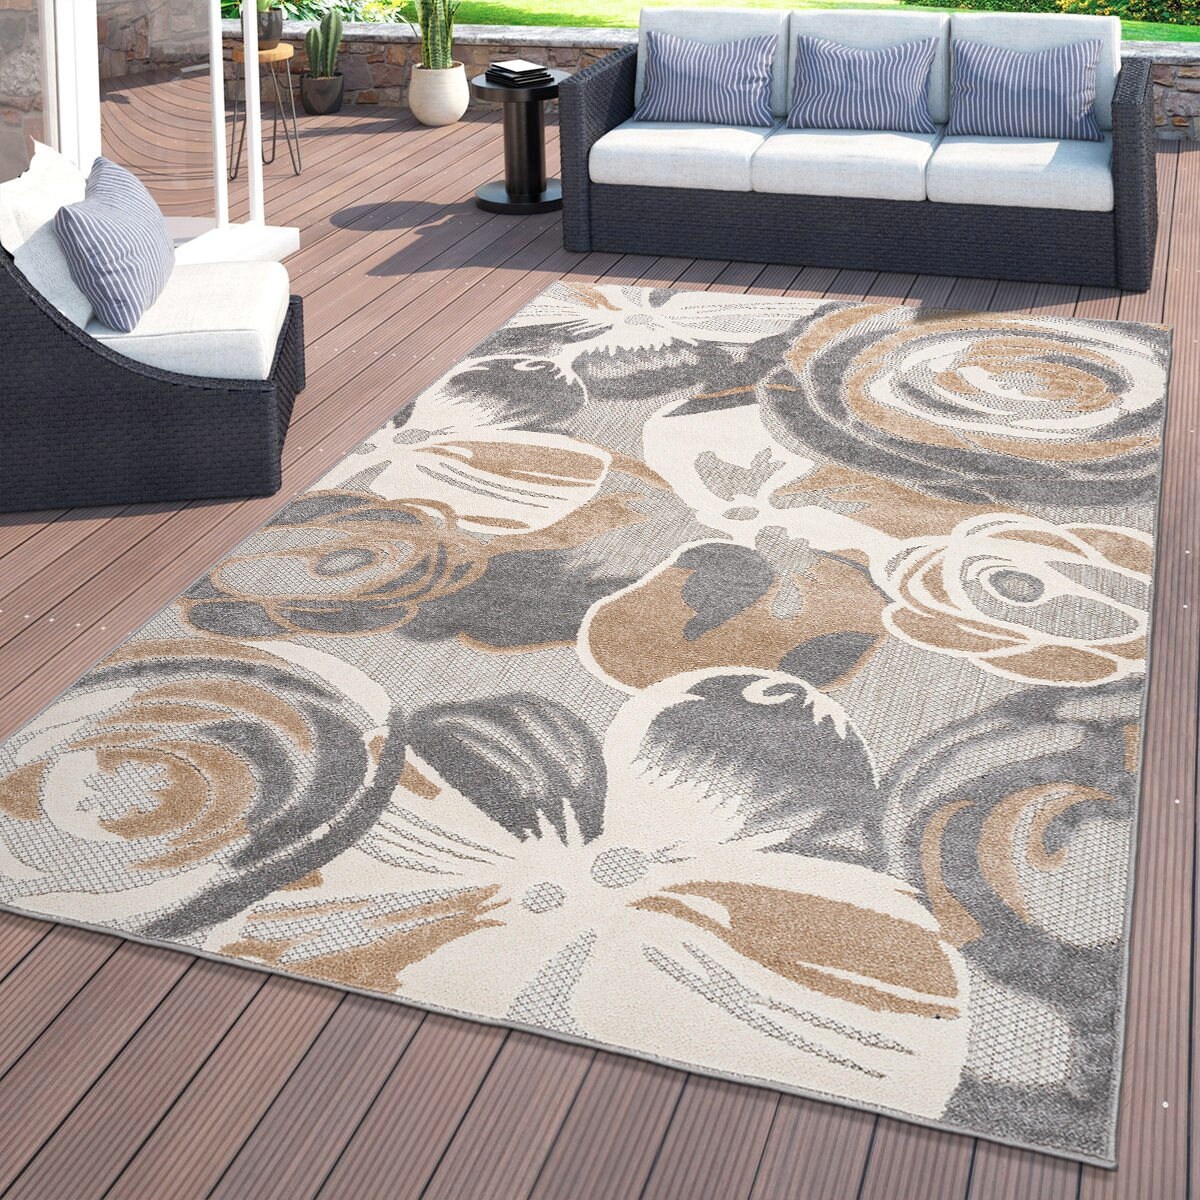 5x7 Water Resistant, Indoor Outdoor Rugs for Patios, Front Door Entry,  Entryway, Deck, Porch, Balcony, Outside Area Rug for Patio, Blue, Floral